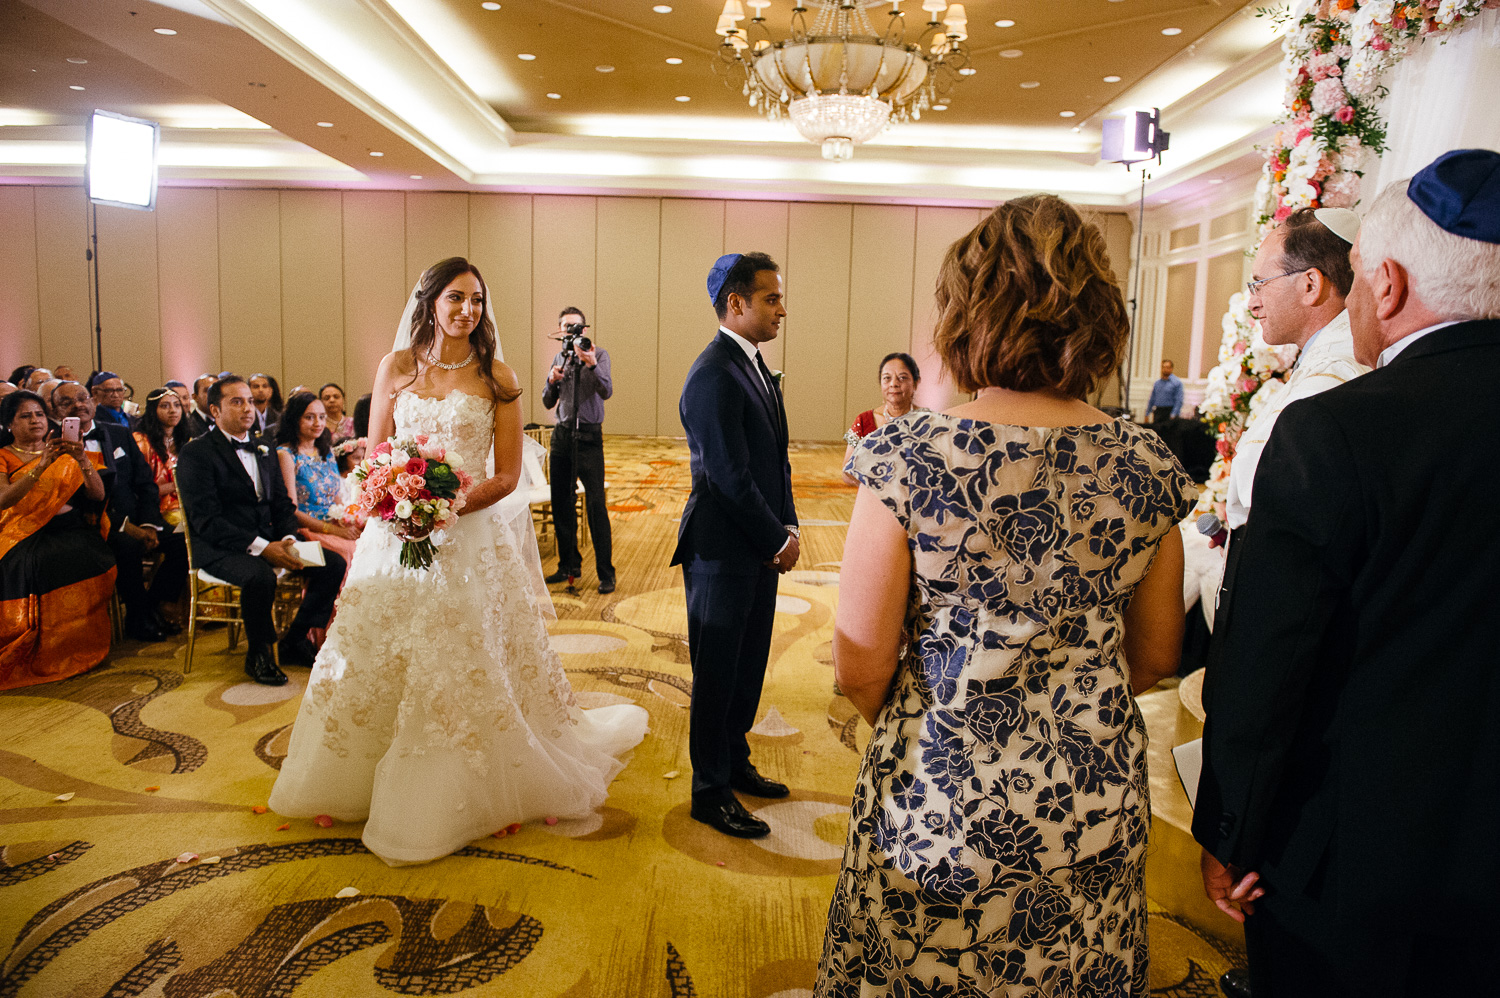 Bride cirlces groom seven times The custom of circling the groom is explained in many ways: o The book of Jeremiah states that “A woman encompasses a man” [31:22]. Hindu Jewish fusion wedding Sugar Land Marriott Hotel Texas-070